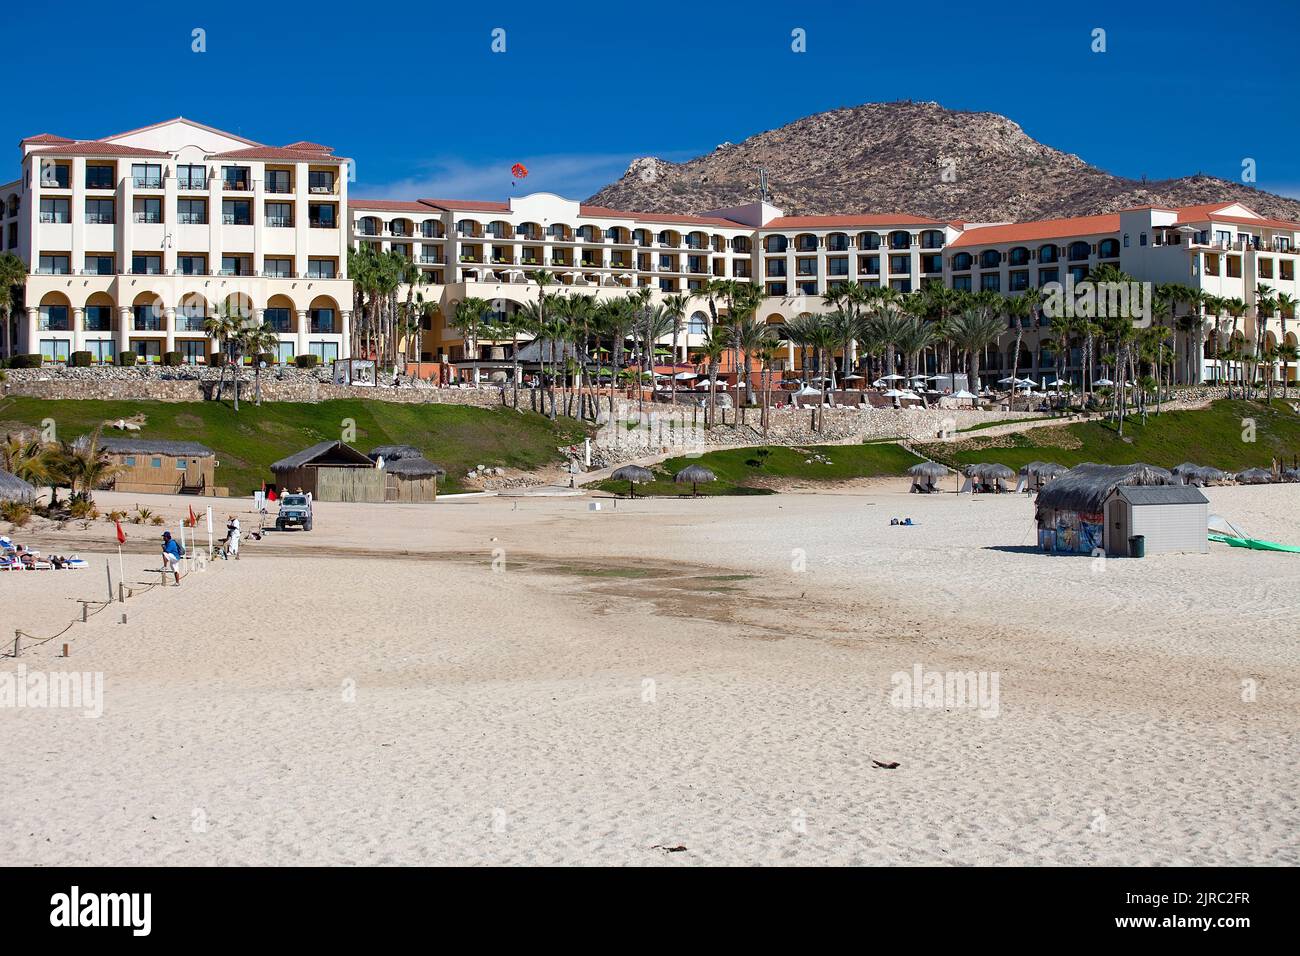 Cabo San Lucas, Mexico - February 13, 2011:  Guests enjoying a luxury resort hotel and spa located on the sea of Cortez and Cabo beach in Mexico. Stock Photo